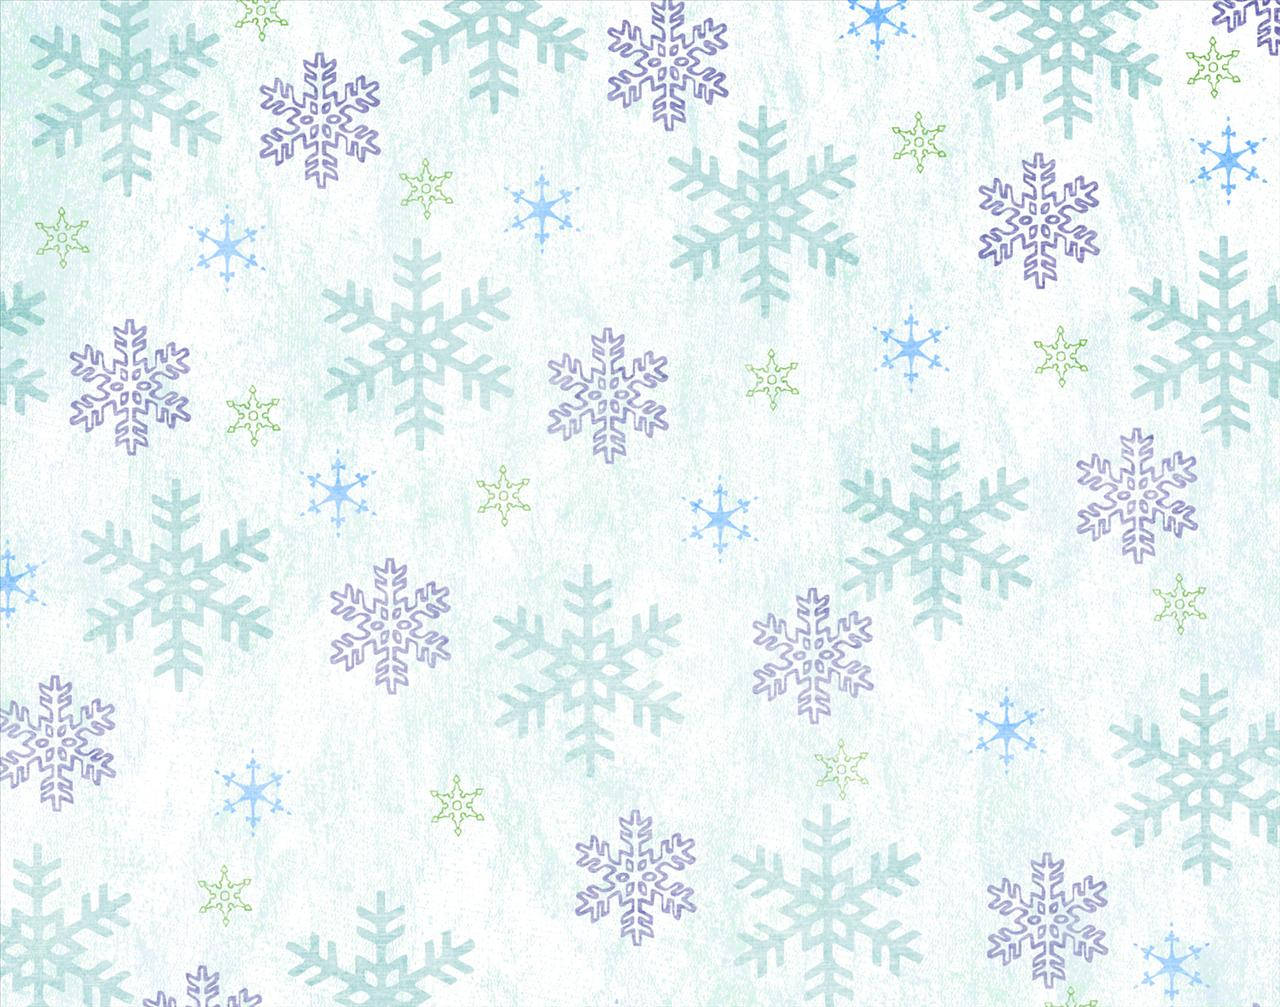 Variety Of Snowflakes Design Background